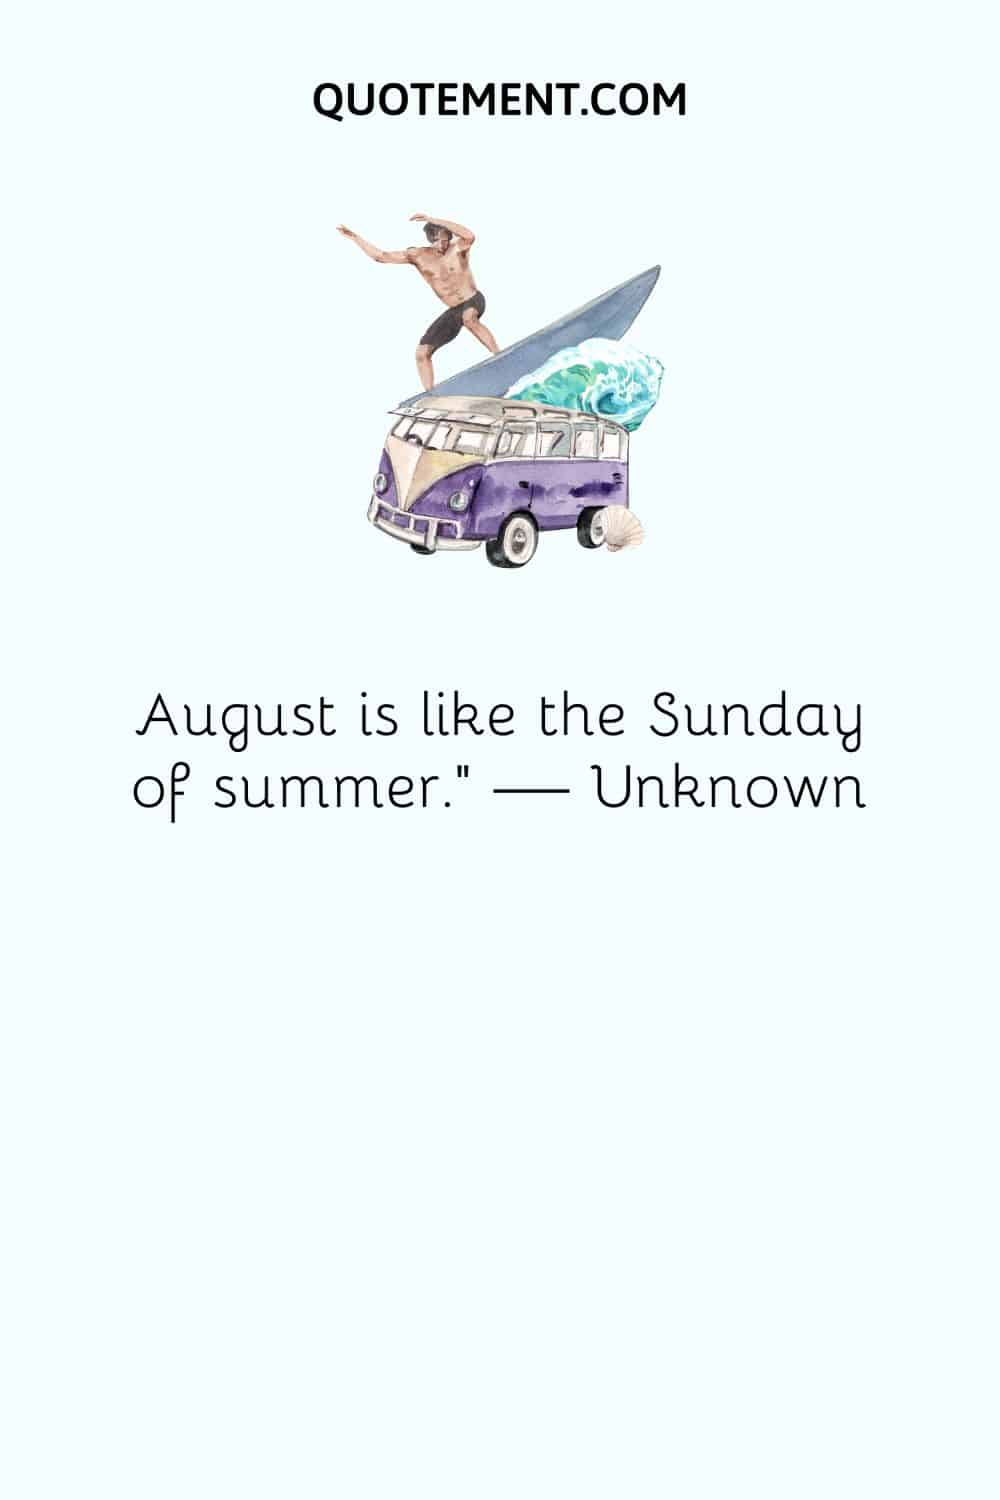 August is like the Sunday of summer